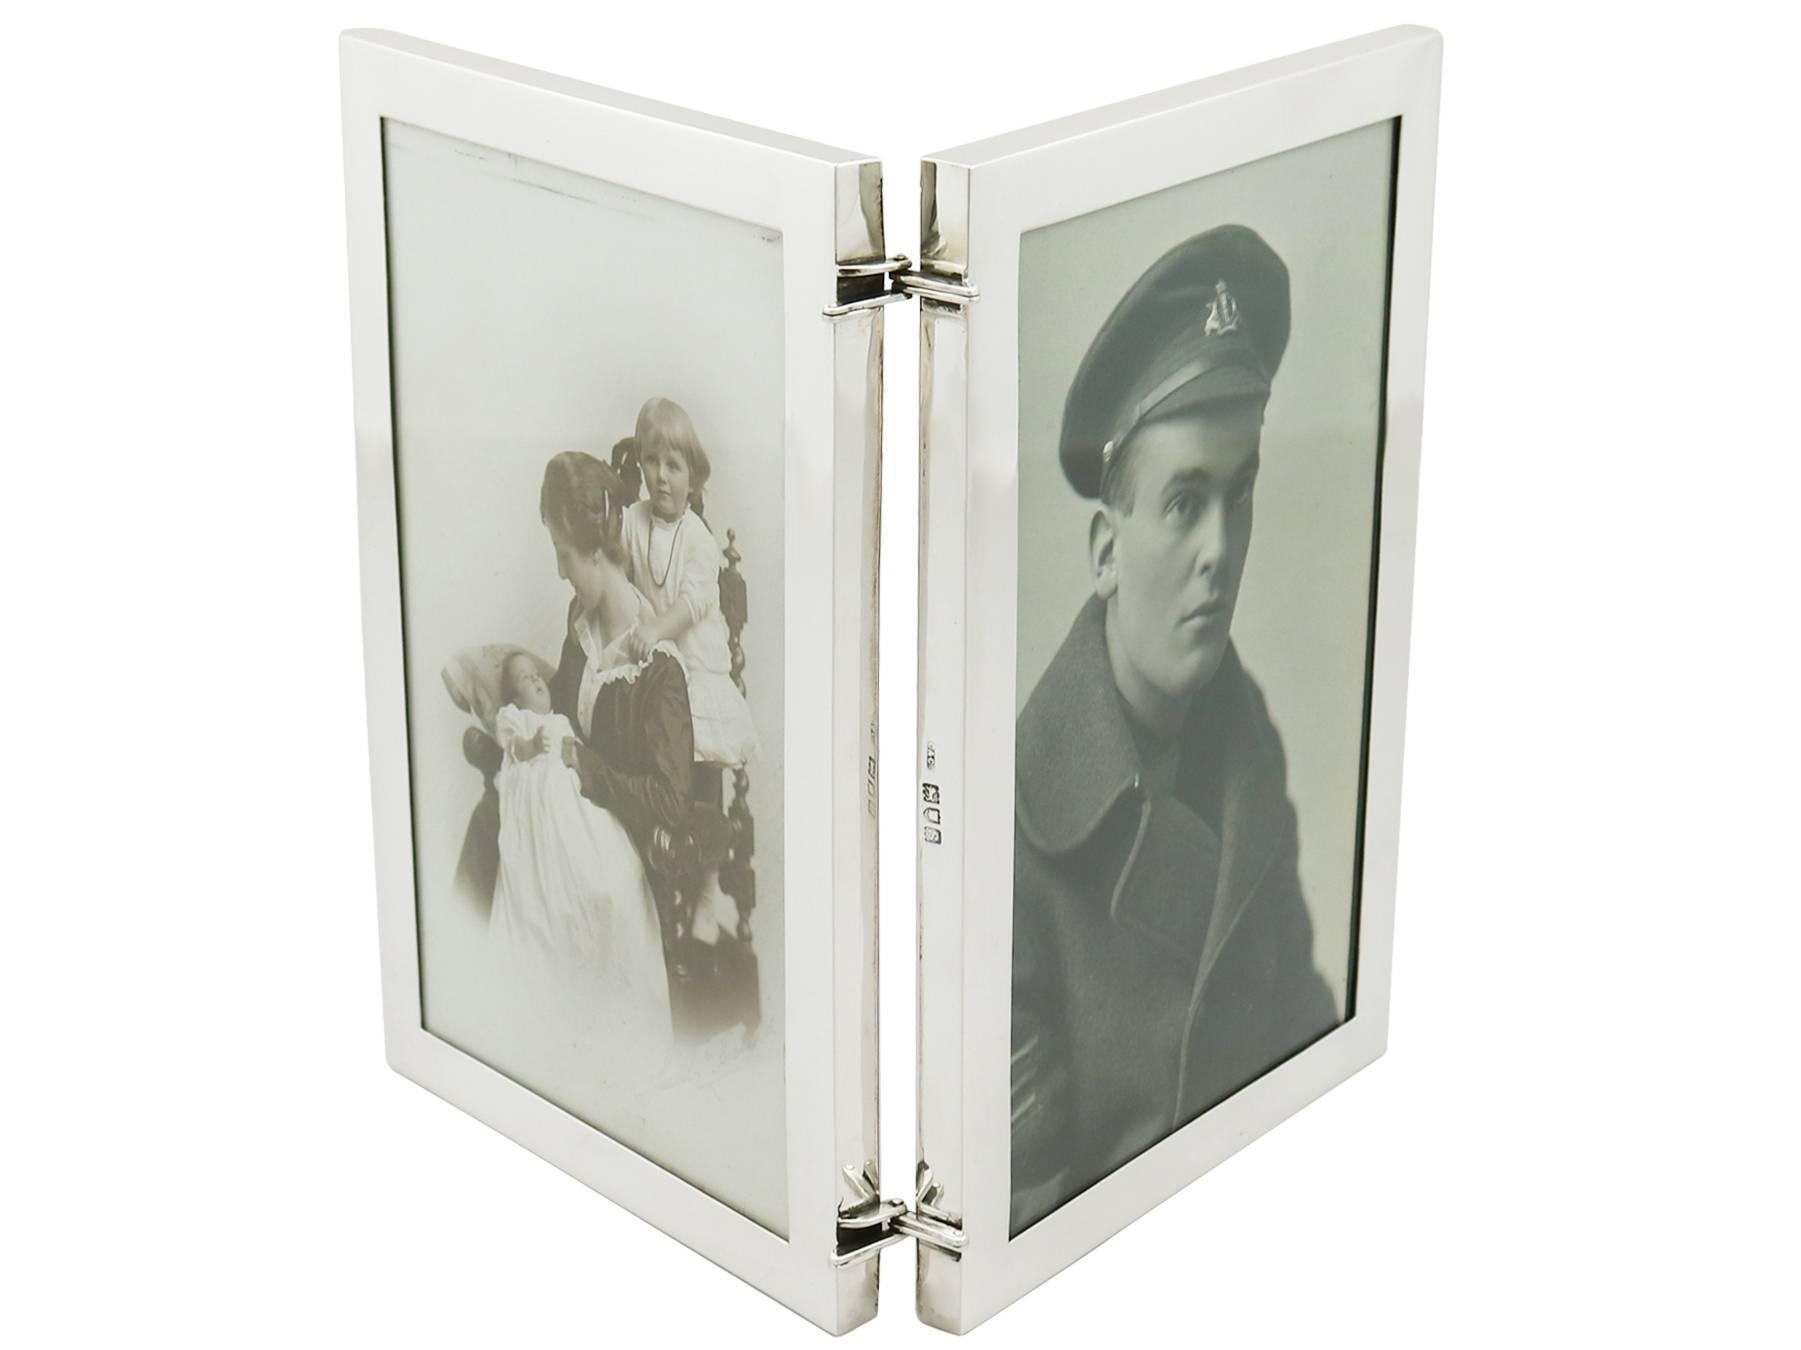 An exceptional, fine and impressive antique George V sterling silver double photograph frame; an addition to our ornamental silverware collection.

This exceptional antique George V sterling silver double photo frame has a plain rectangular form